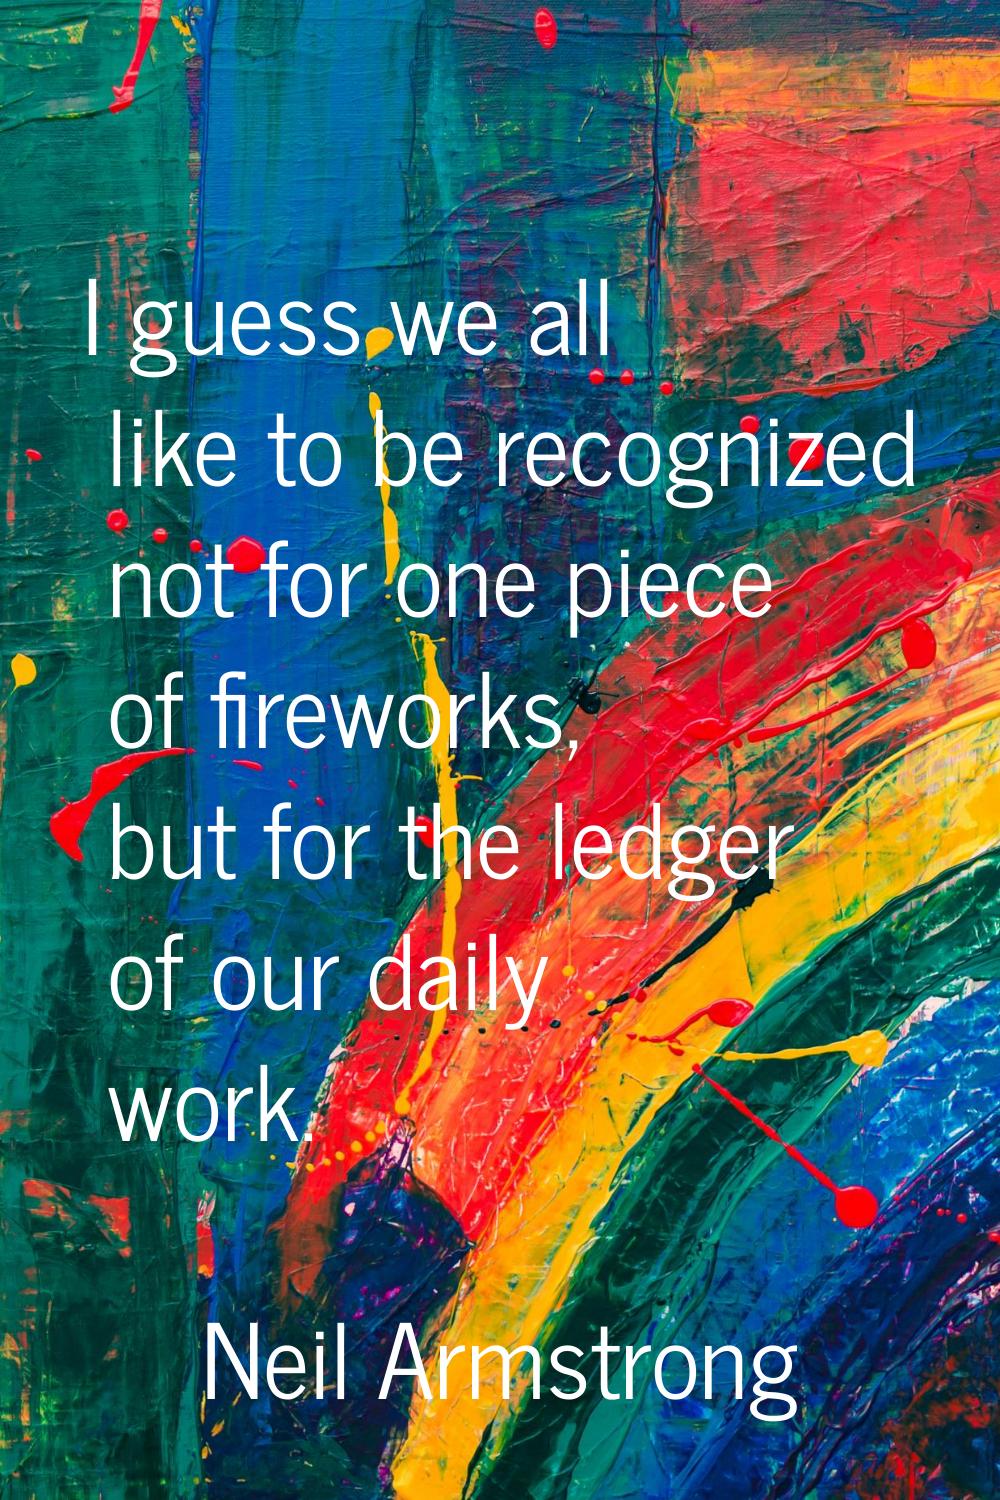 I guess we all like to be recognized not for one piece of fireworks, but for the ledger of our dail